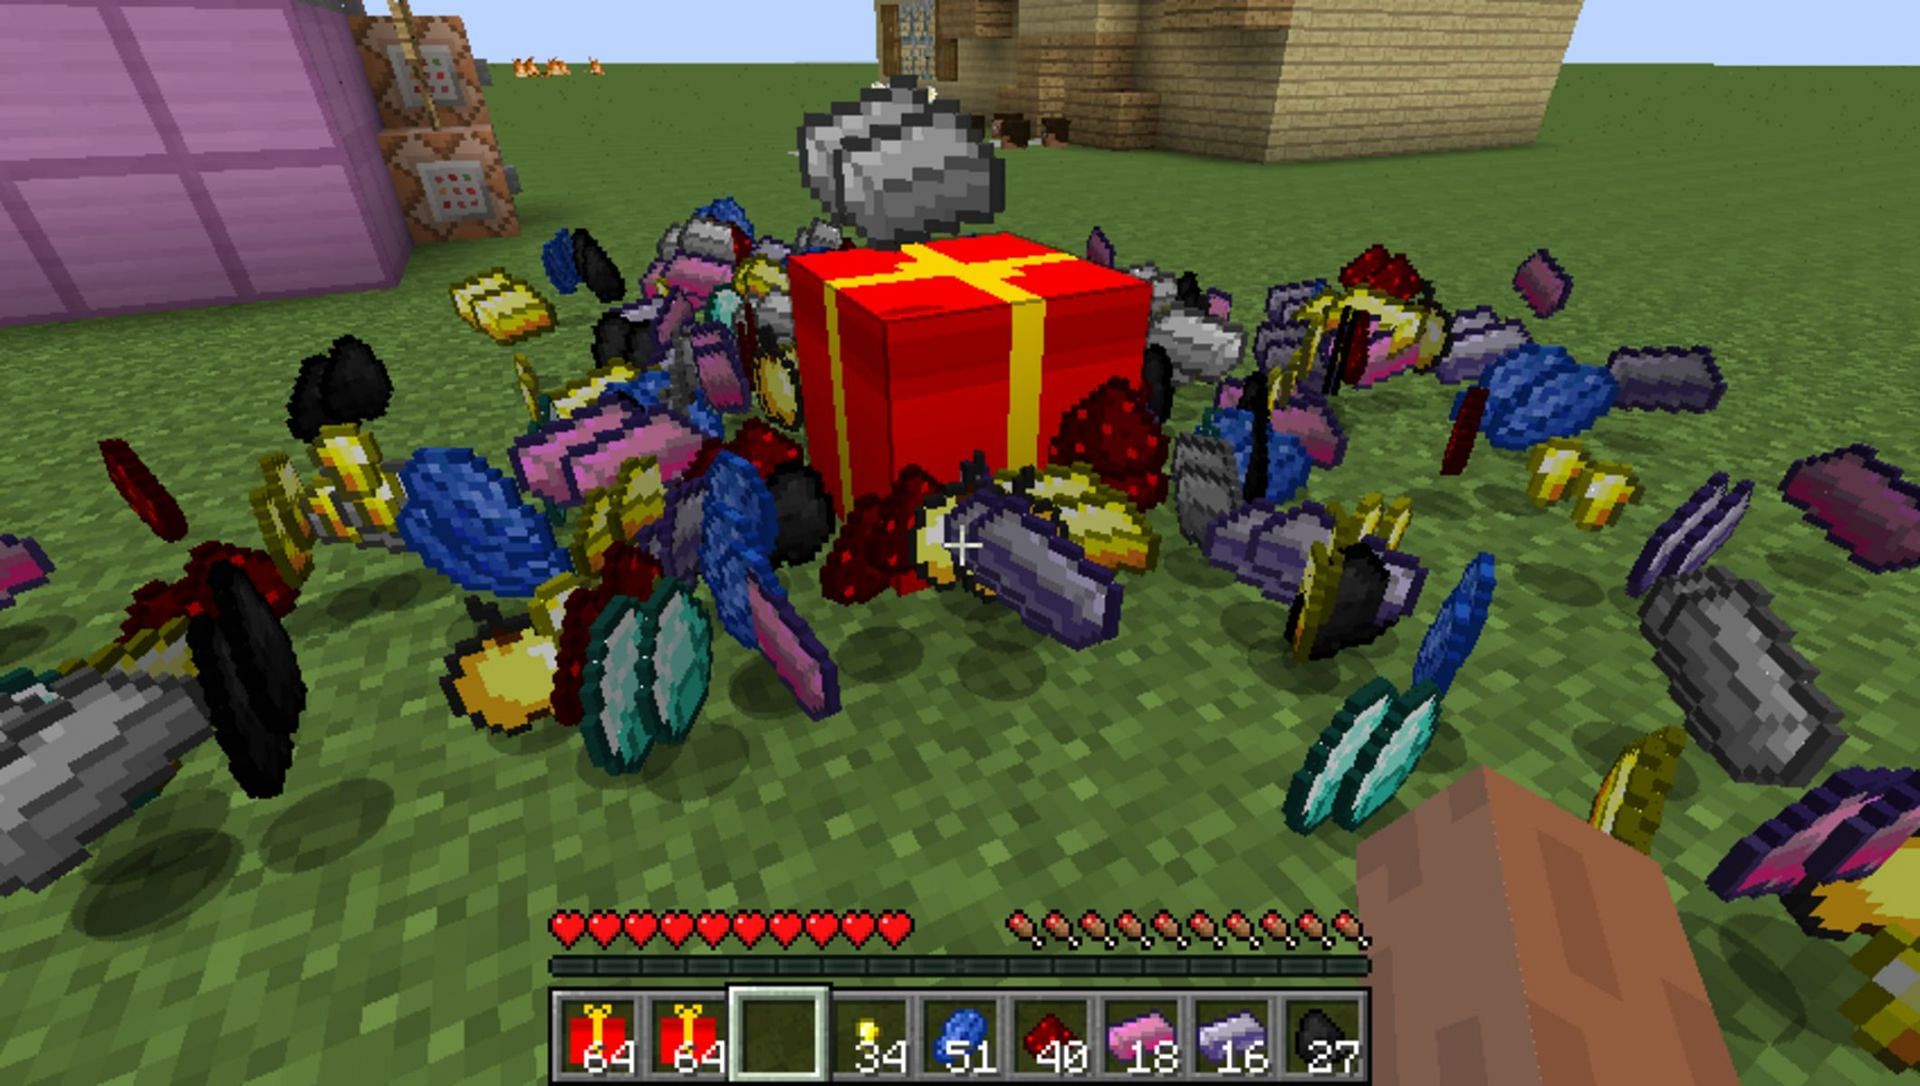 A lucky block rewarding the player with various items (Image via jtrent238/PlanetMinecraft)